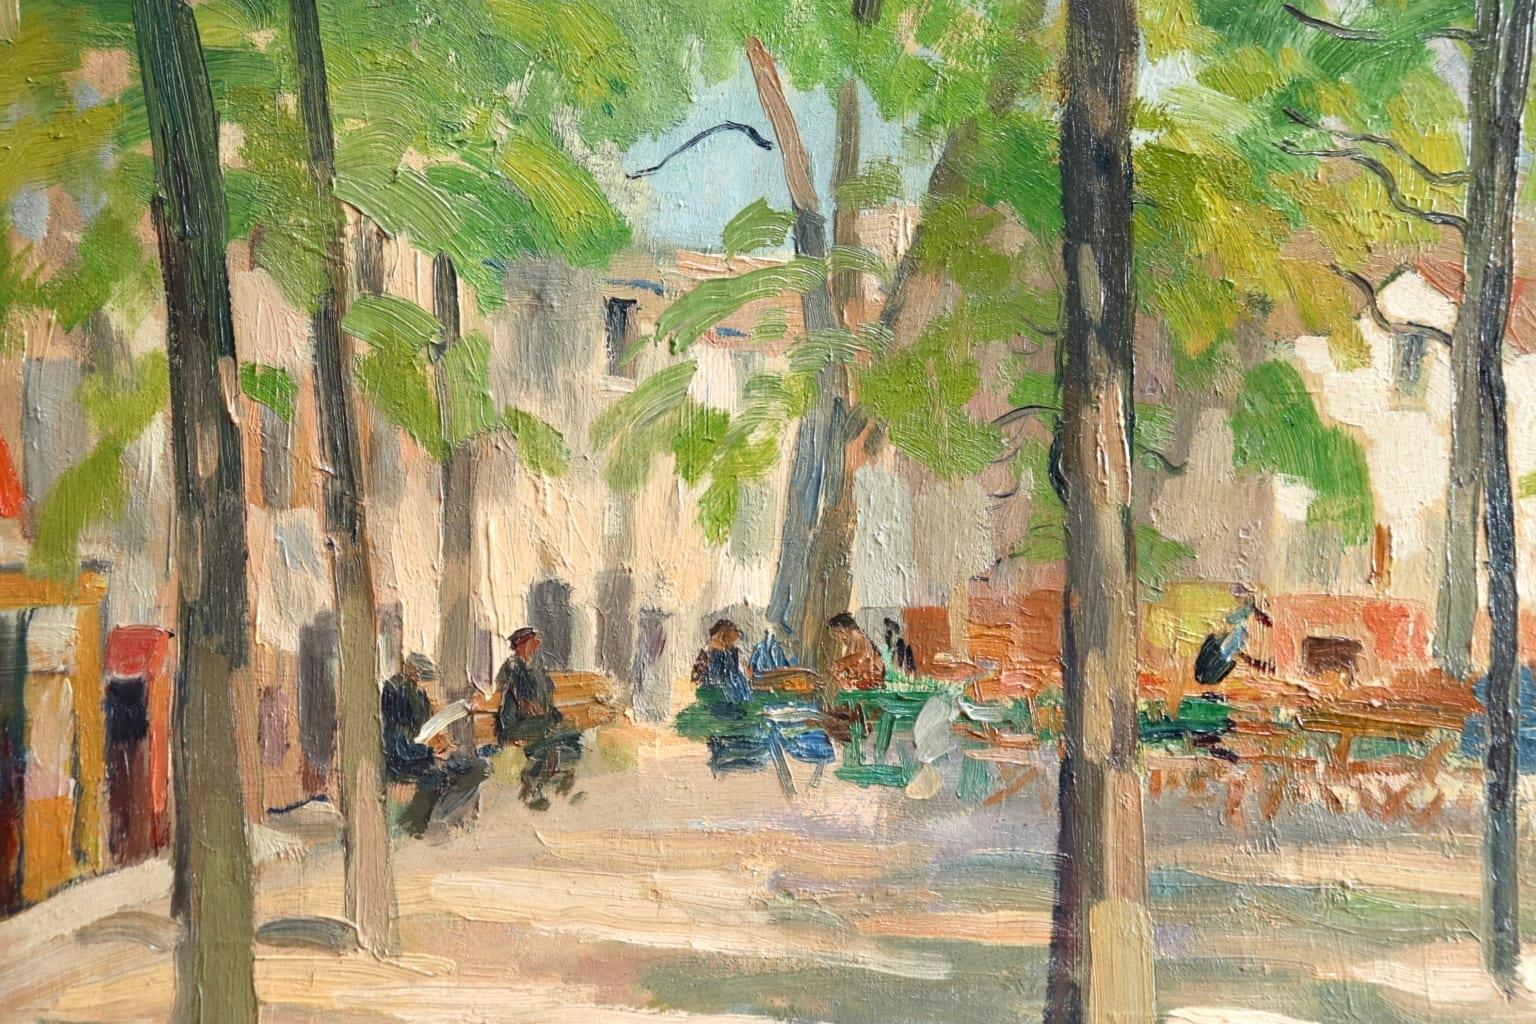 A beautiful oil on canvas circa 1910 by Russian painter Elie Anatole Pavil depicting a view of Place du Tertre in Montmartre, France. The sun shines through the green trees and people enjoy breakfast al fresco in the warm